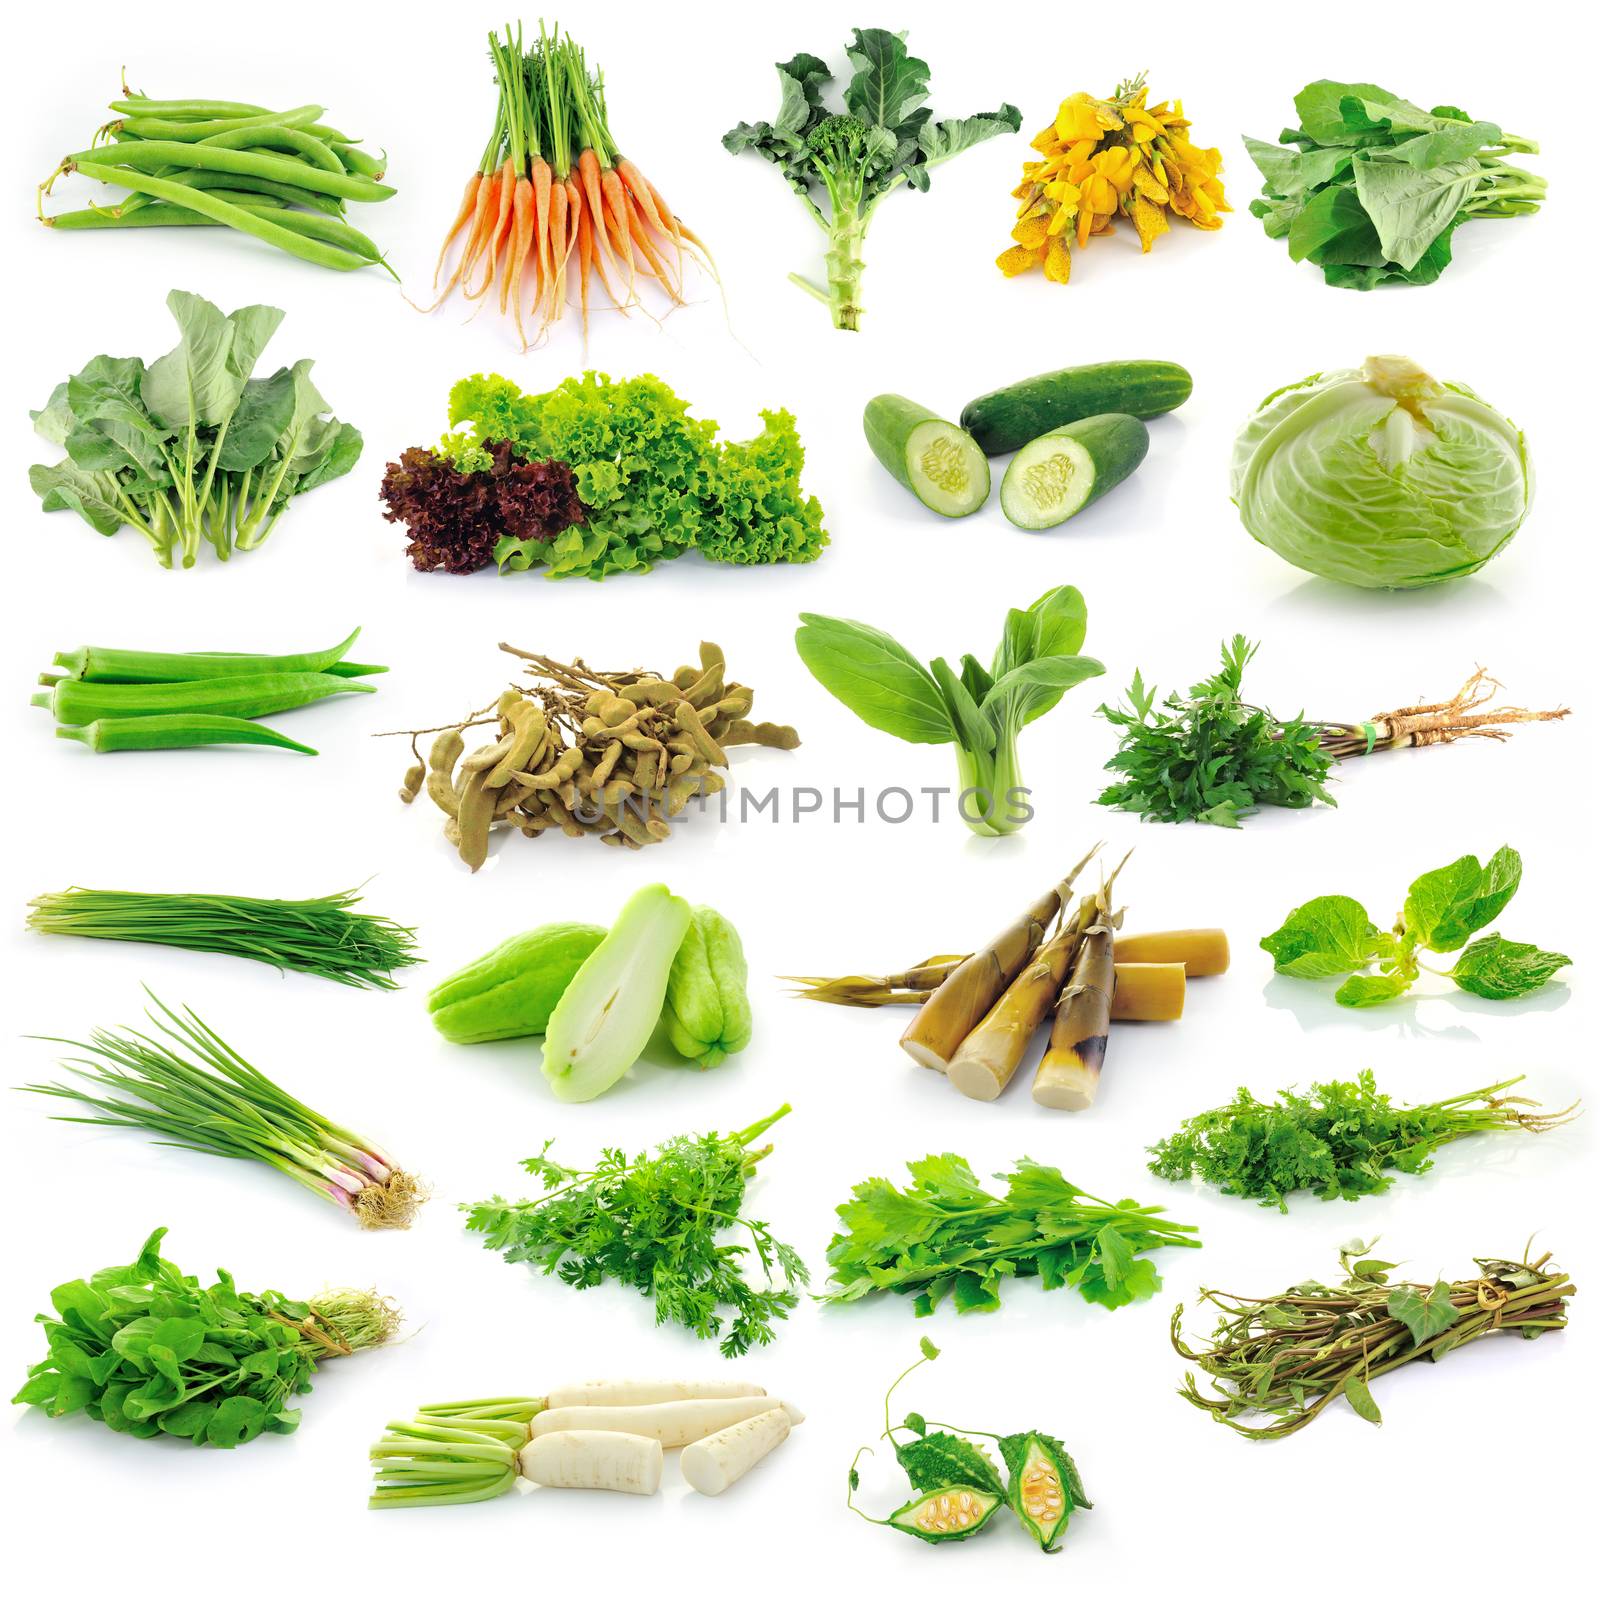 Vegetables collection isolated on white background